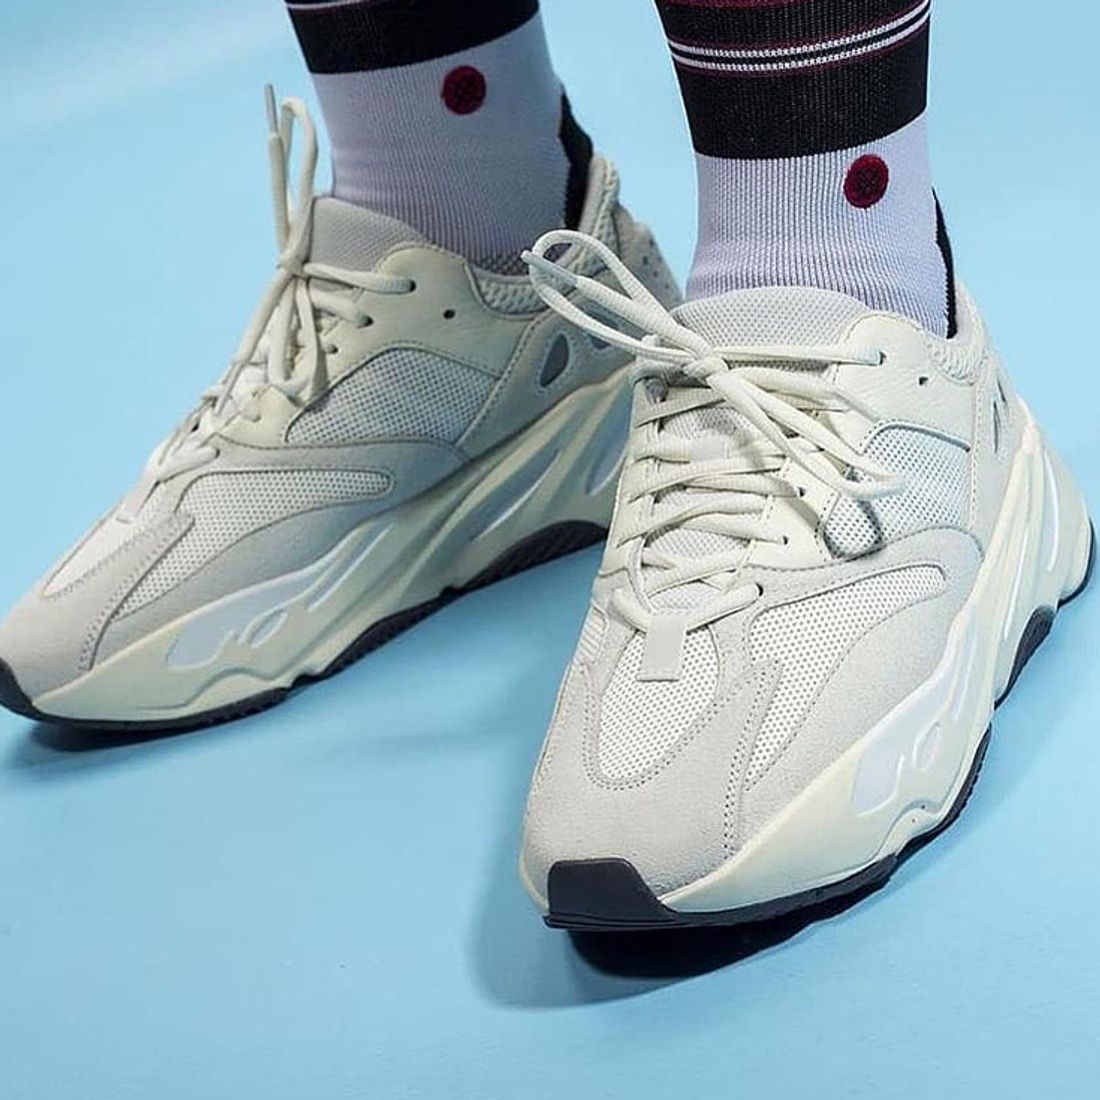 Are You Copping adidas Yeezy Boost 700 Analog This Weekend? •